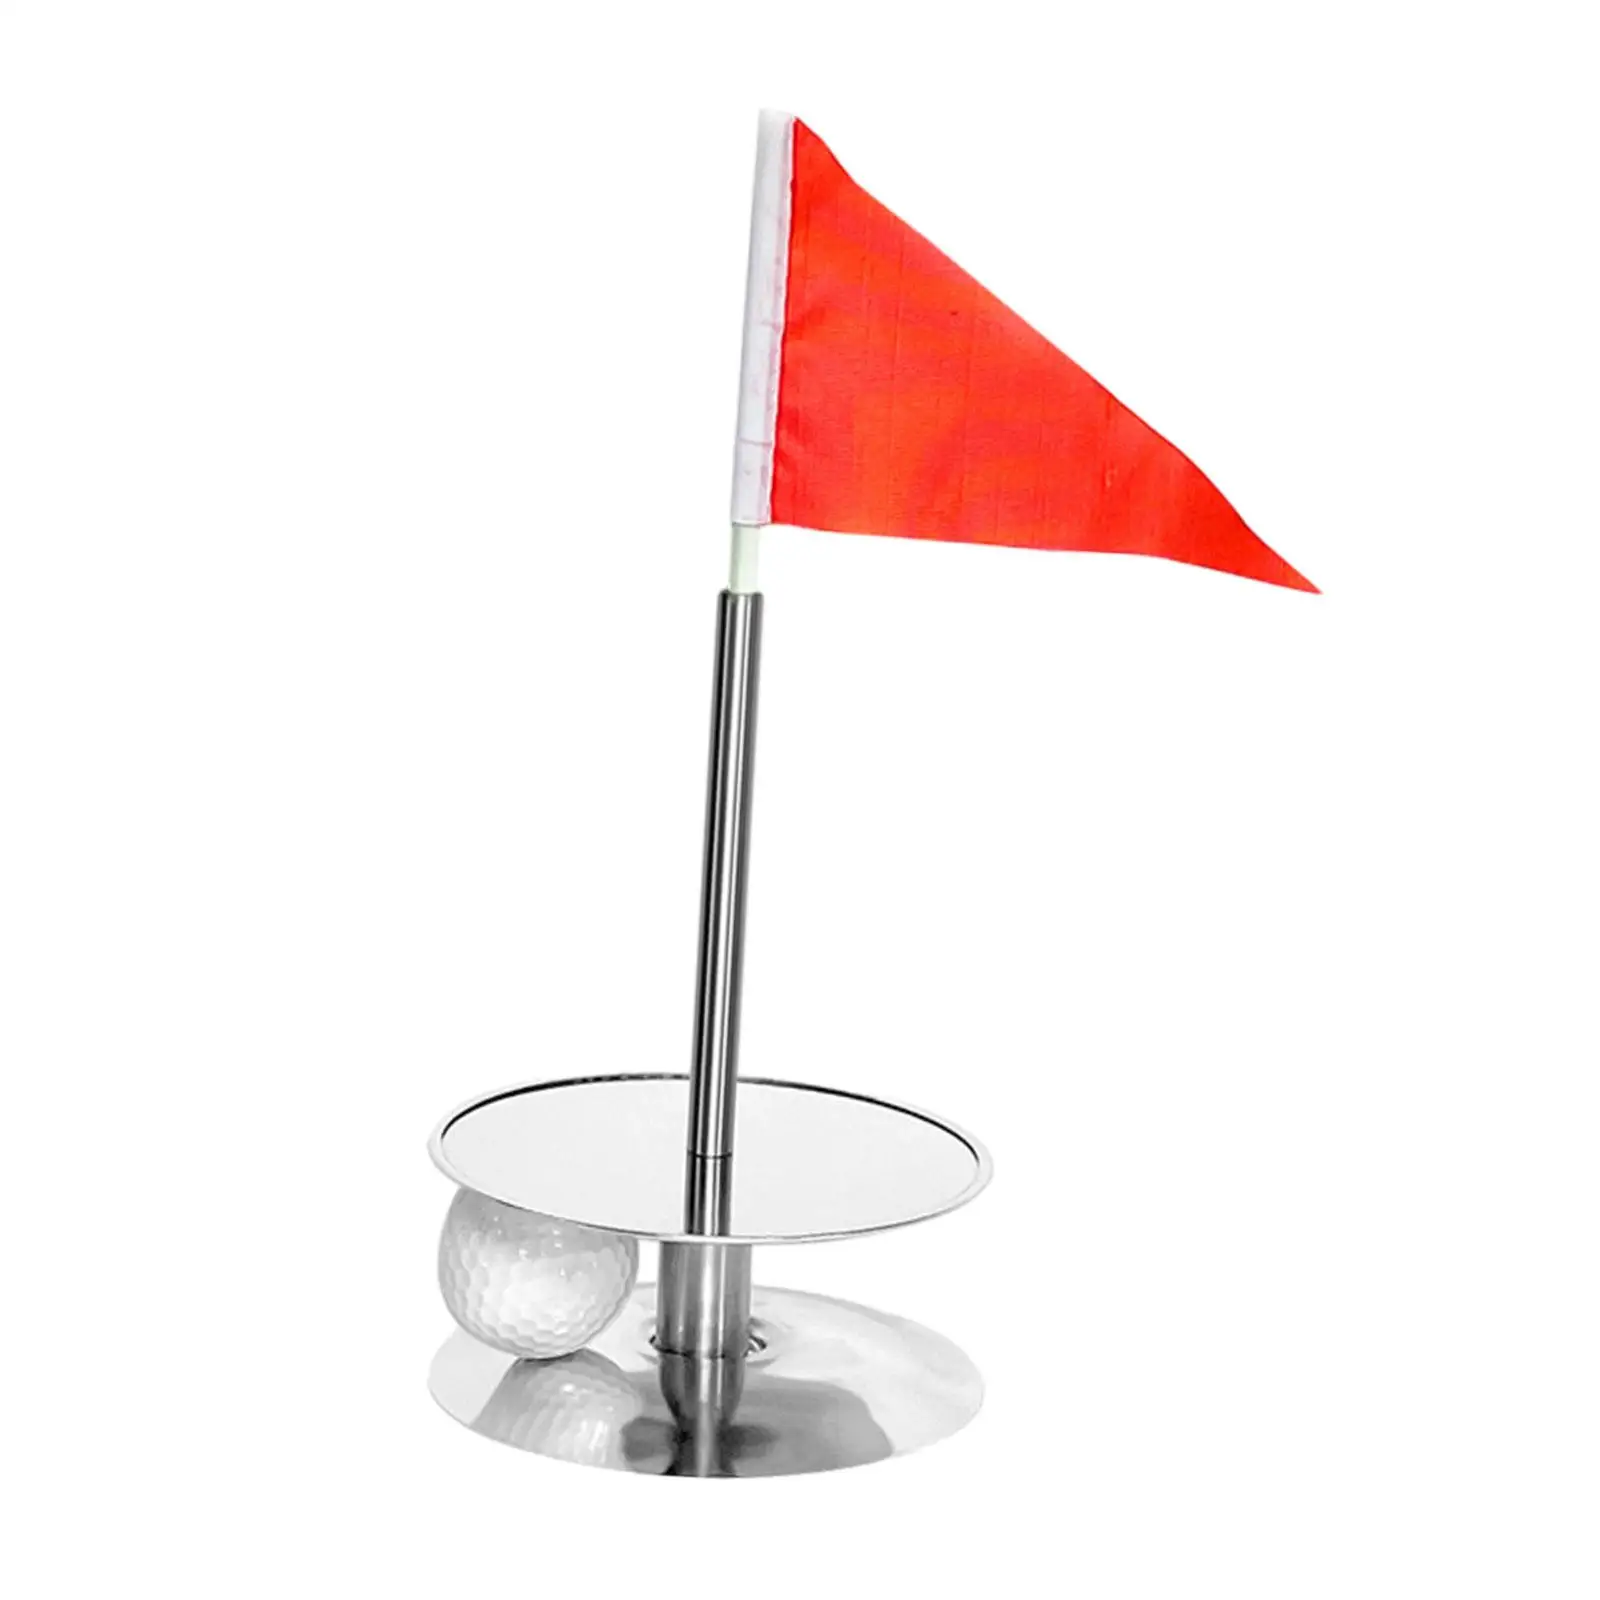 Golf Putting Cup Practice Gifts Alignment Guide Golf Flagpoles Golf Flags